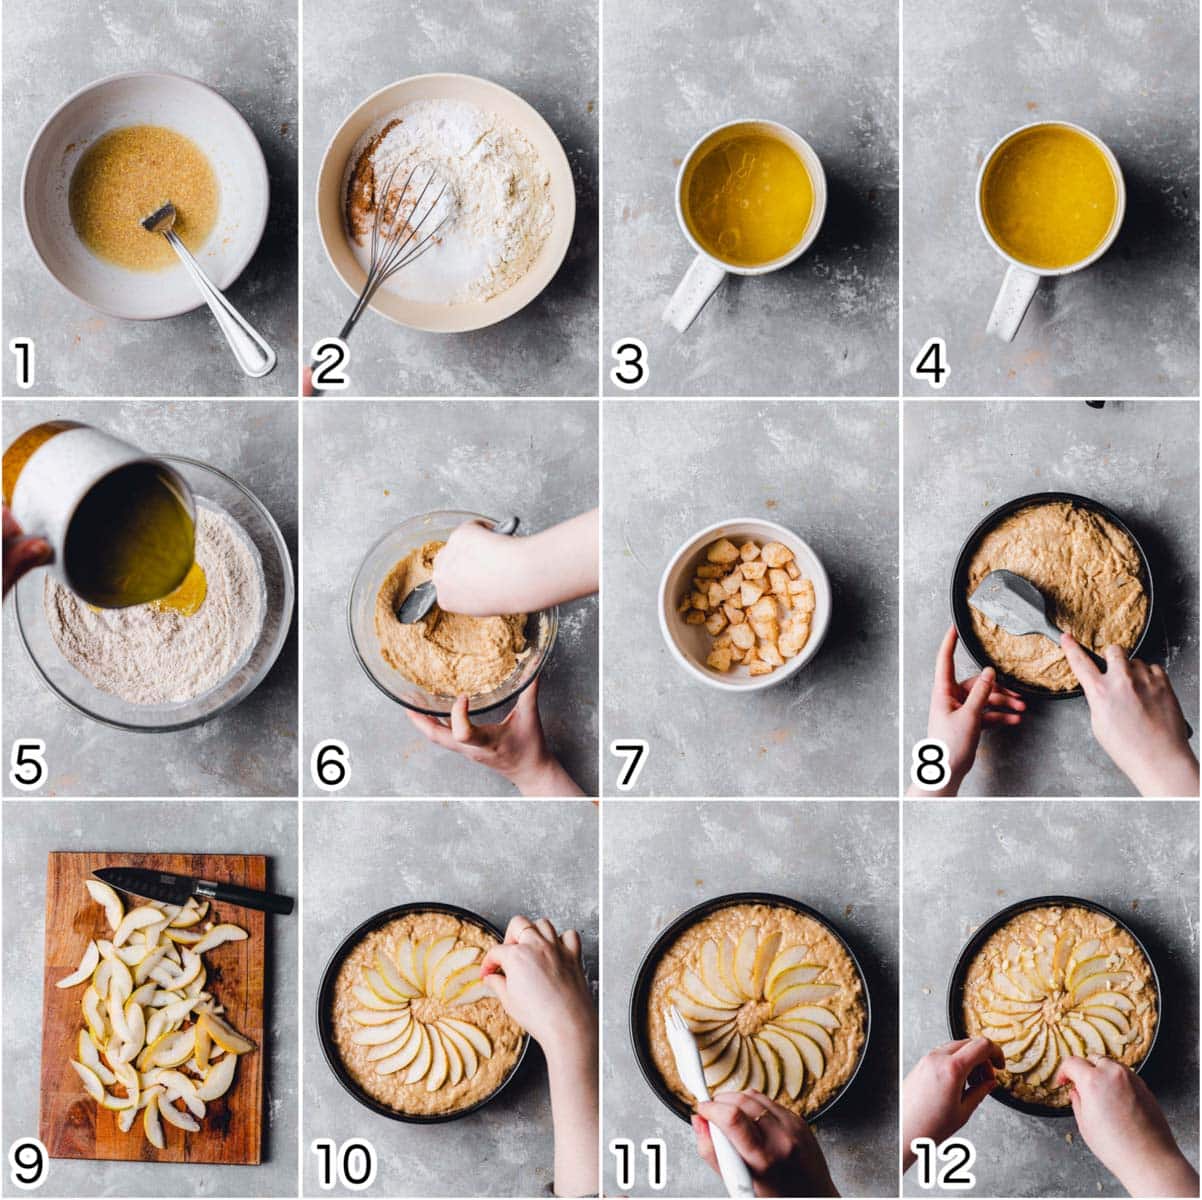 A collage of 12 images showing various steps in making a pear cake.